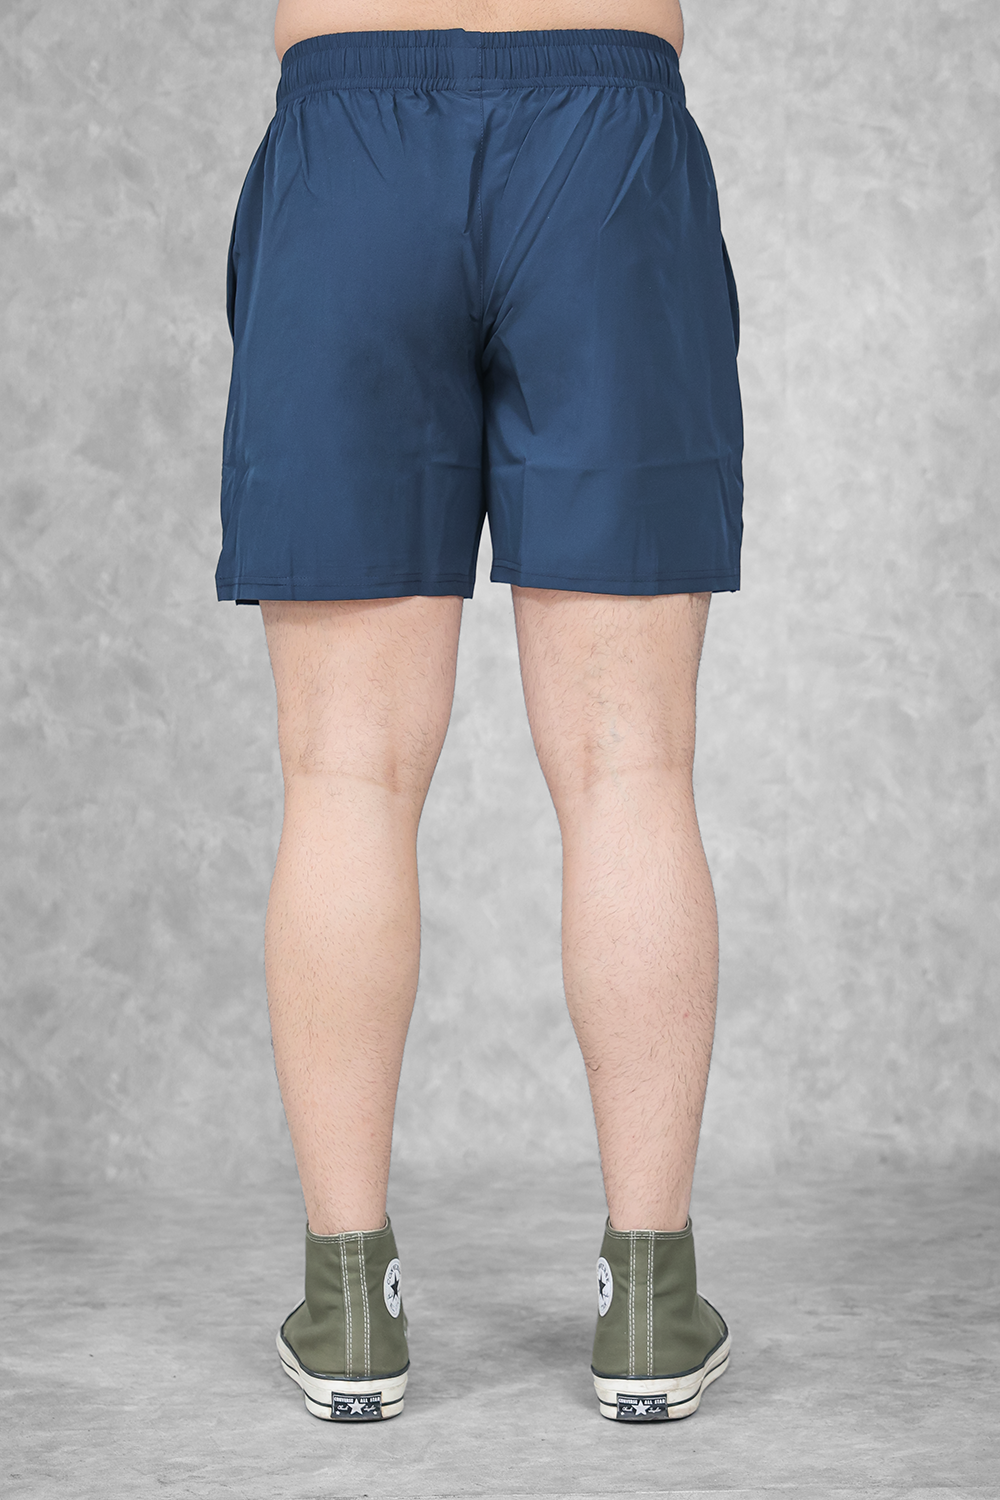 Dry-Fit Woven shorts- Navy